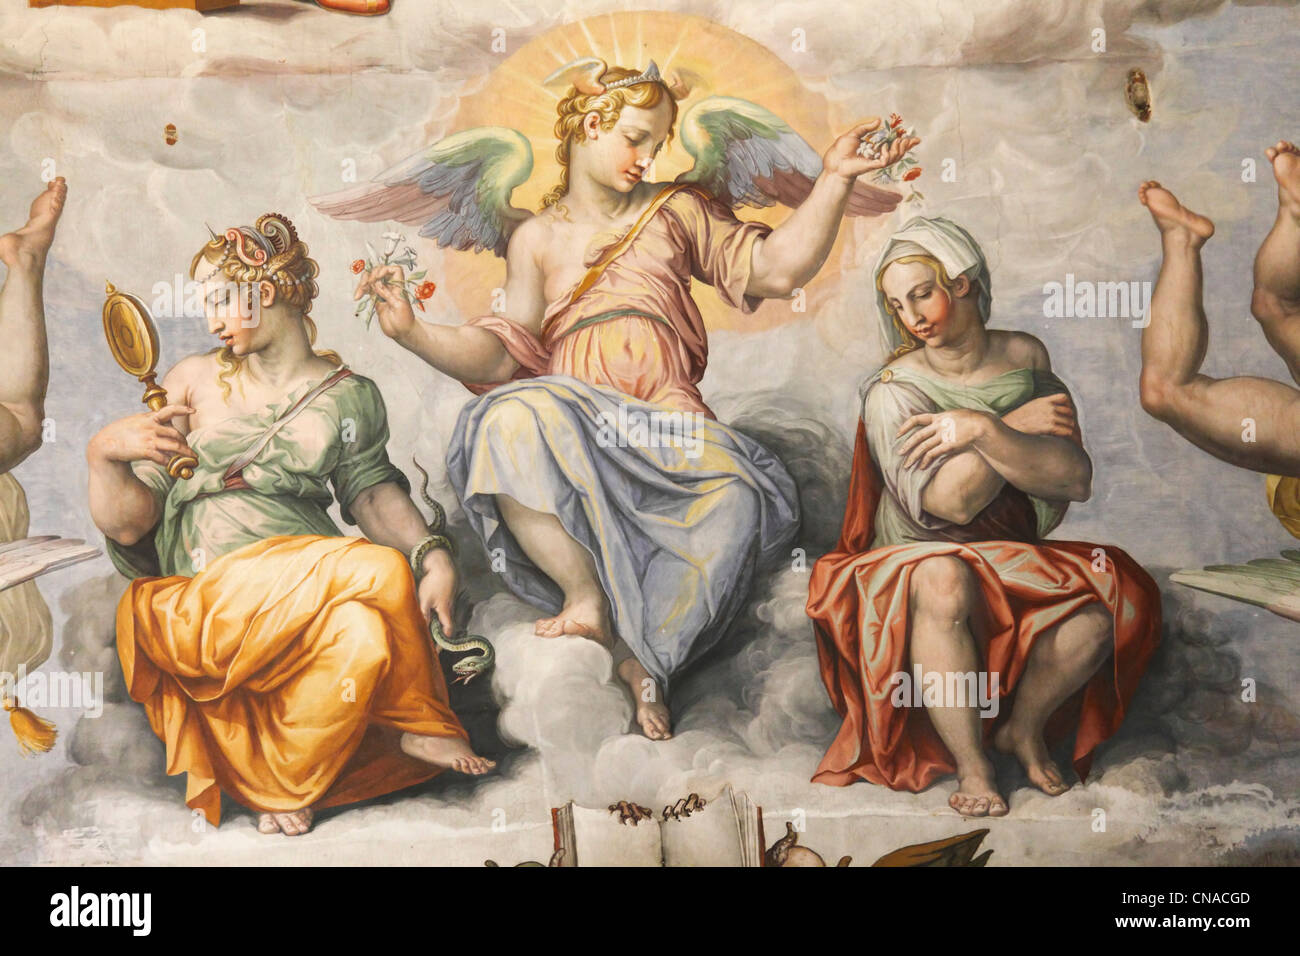 Italy, Tuscany, Florence, historic center listed as World Heritage by UNESCO, frescoes painted by Giorgio Vasari inside the Stock Photo